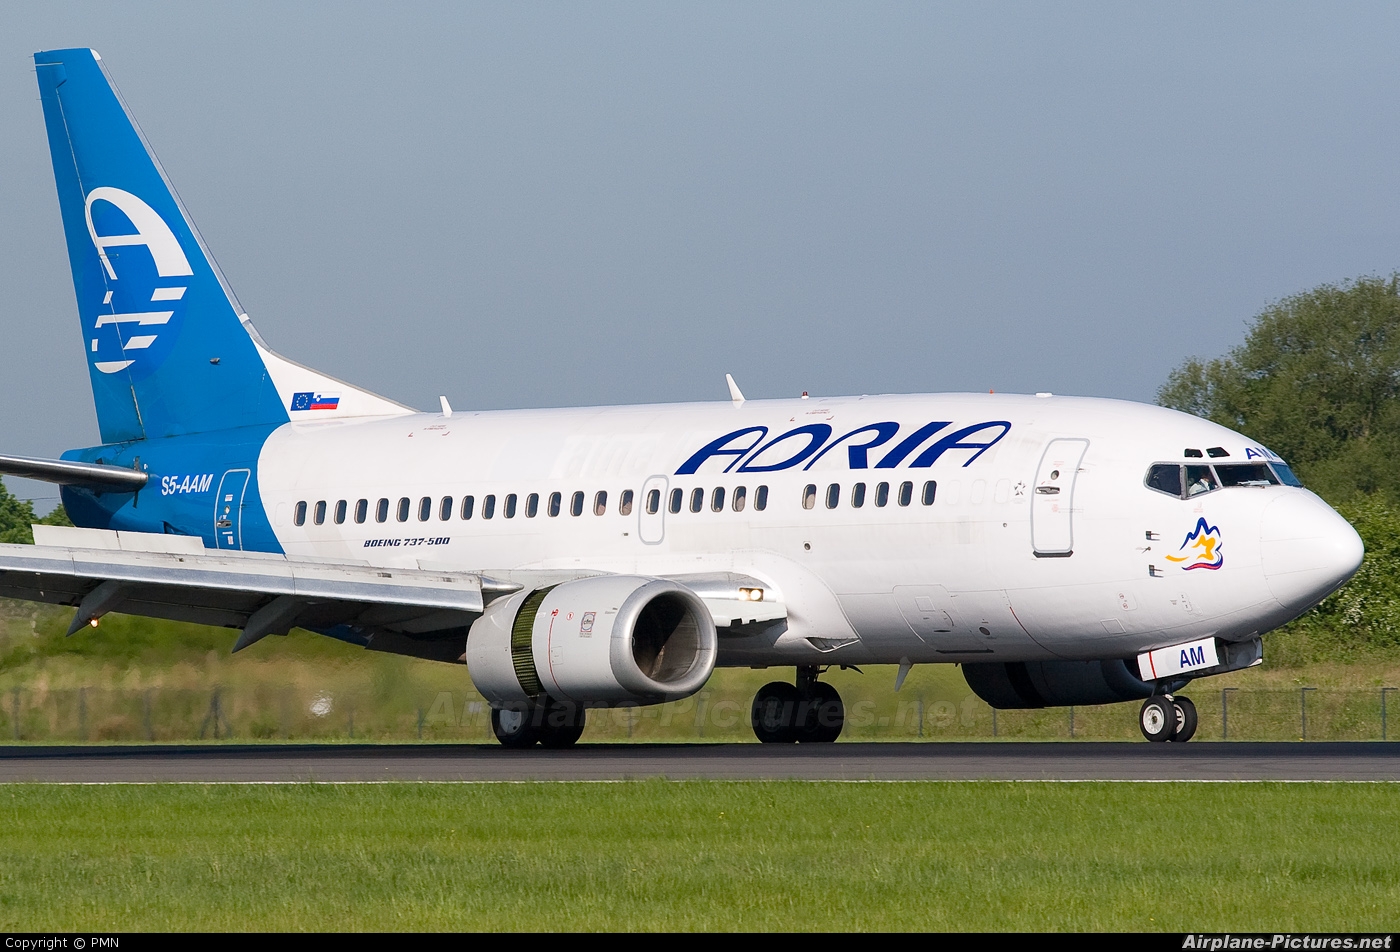 Adria Airways S5-AAM aircraft at Manchester